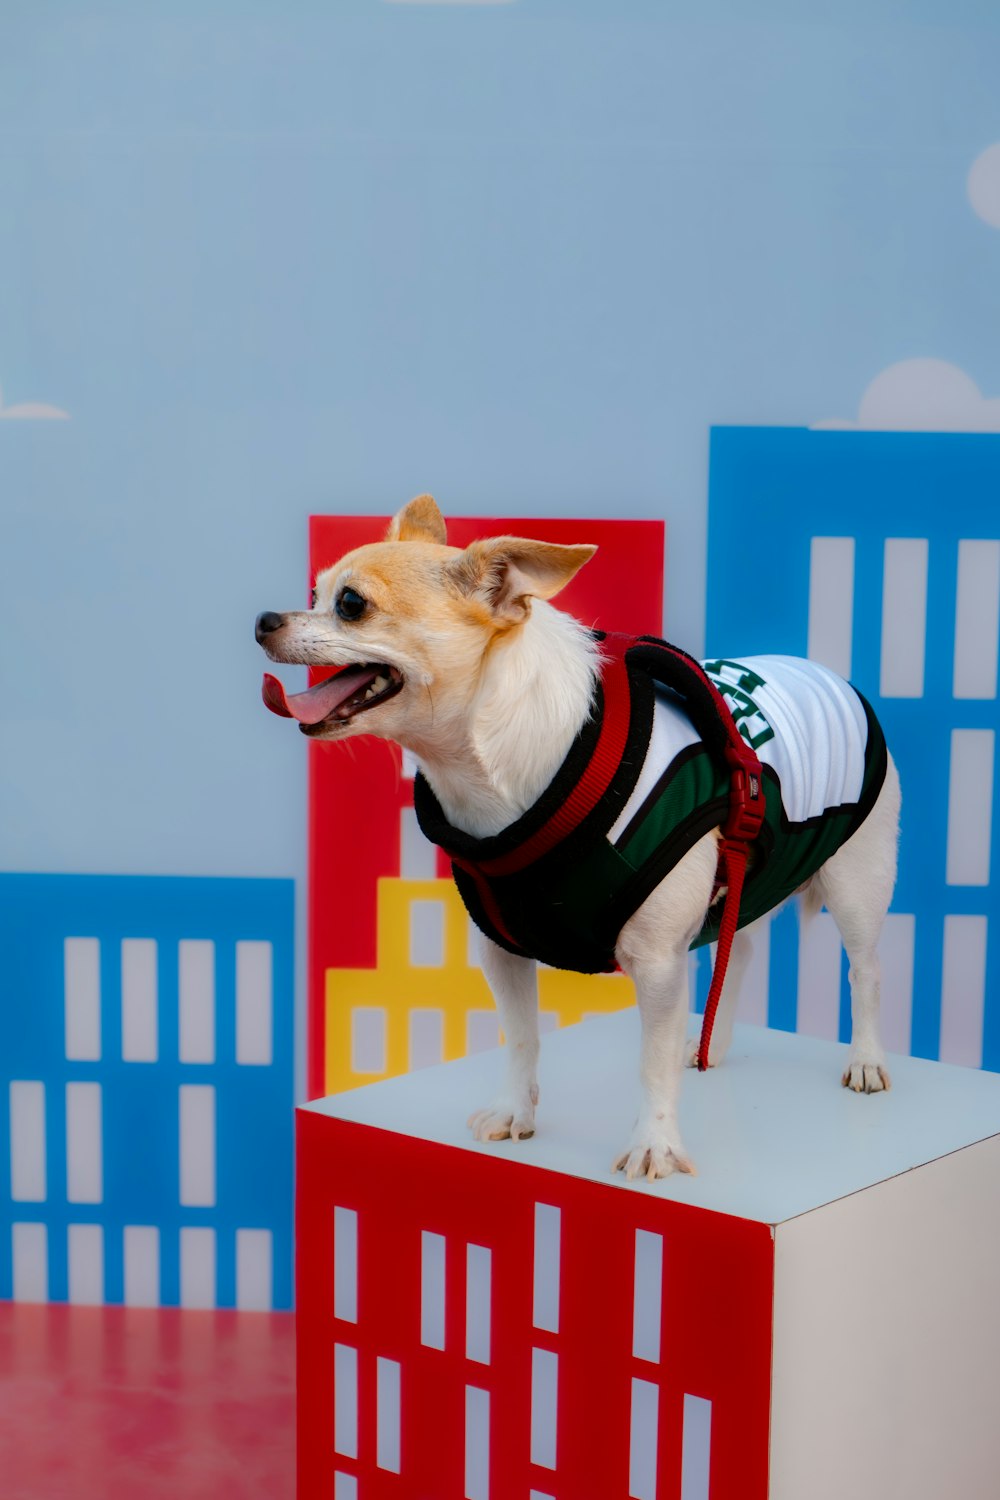 a small dog standing on top of a red and white block